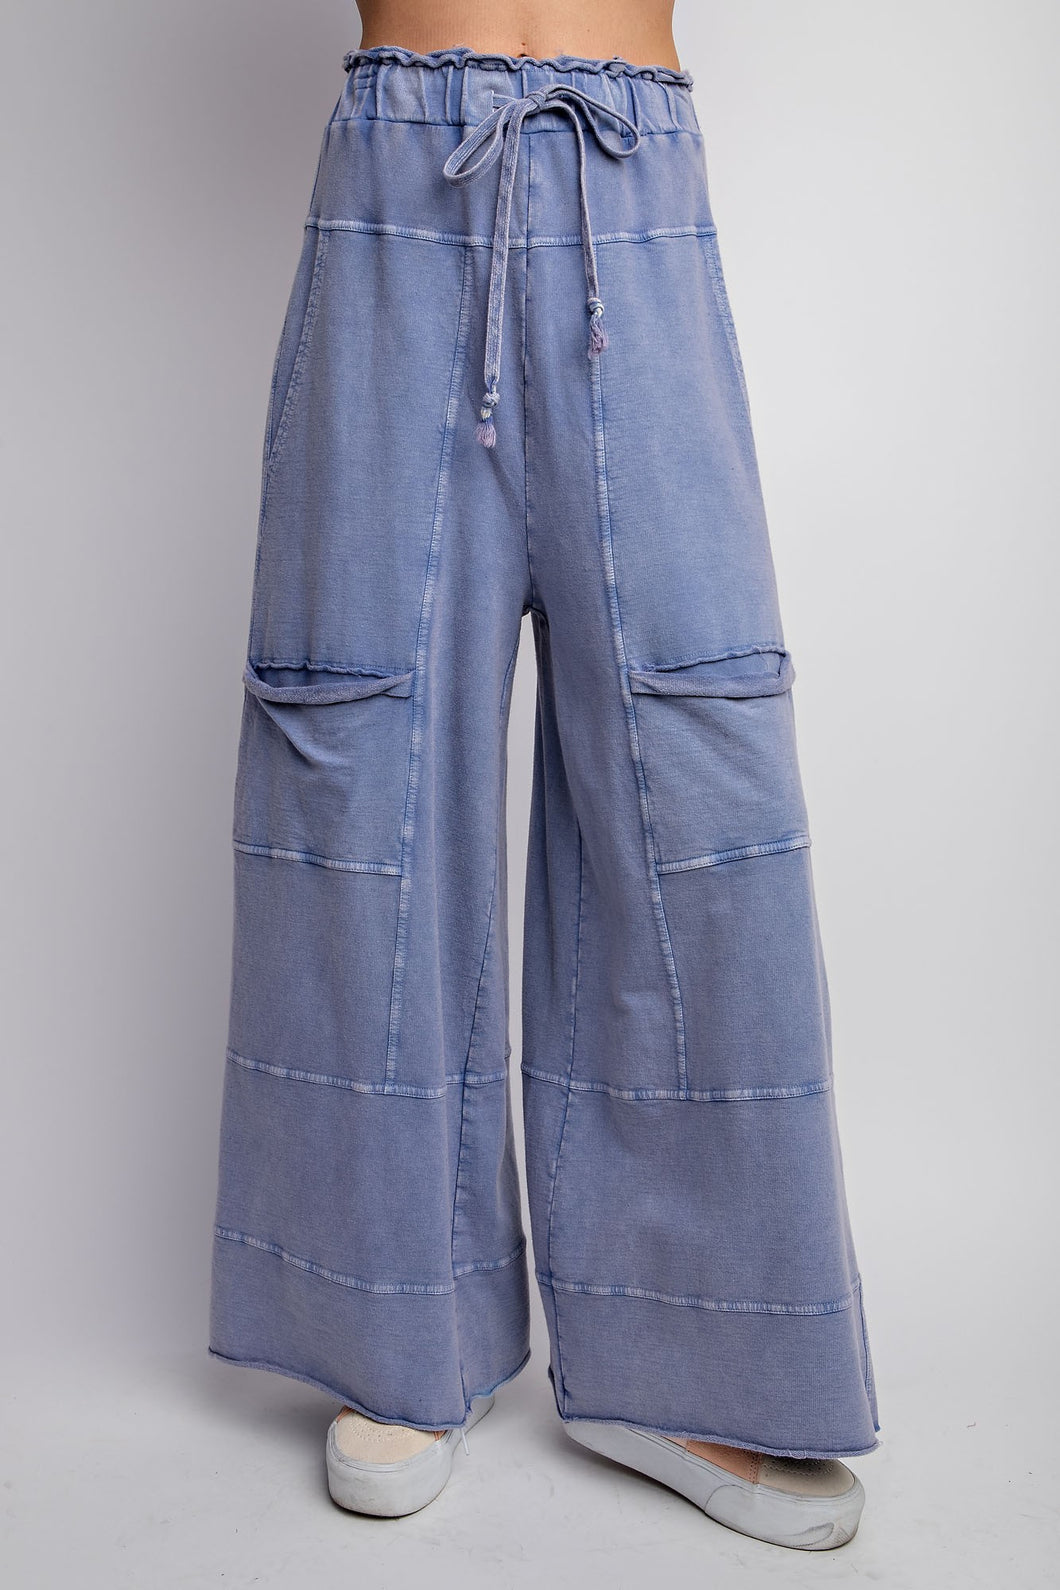 Easel Mineral Washed Terry Knit Pants in Washed Denim ON ORDER Pants Easel   